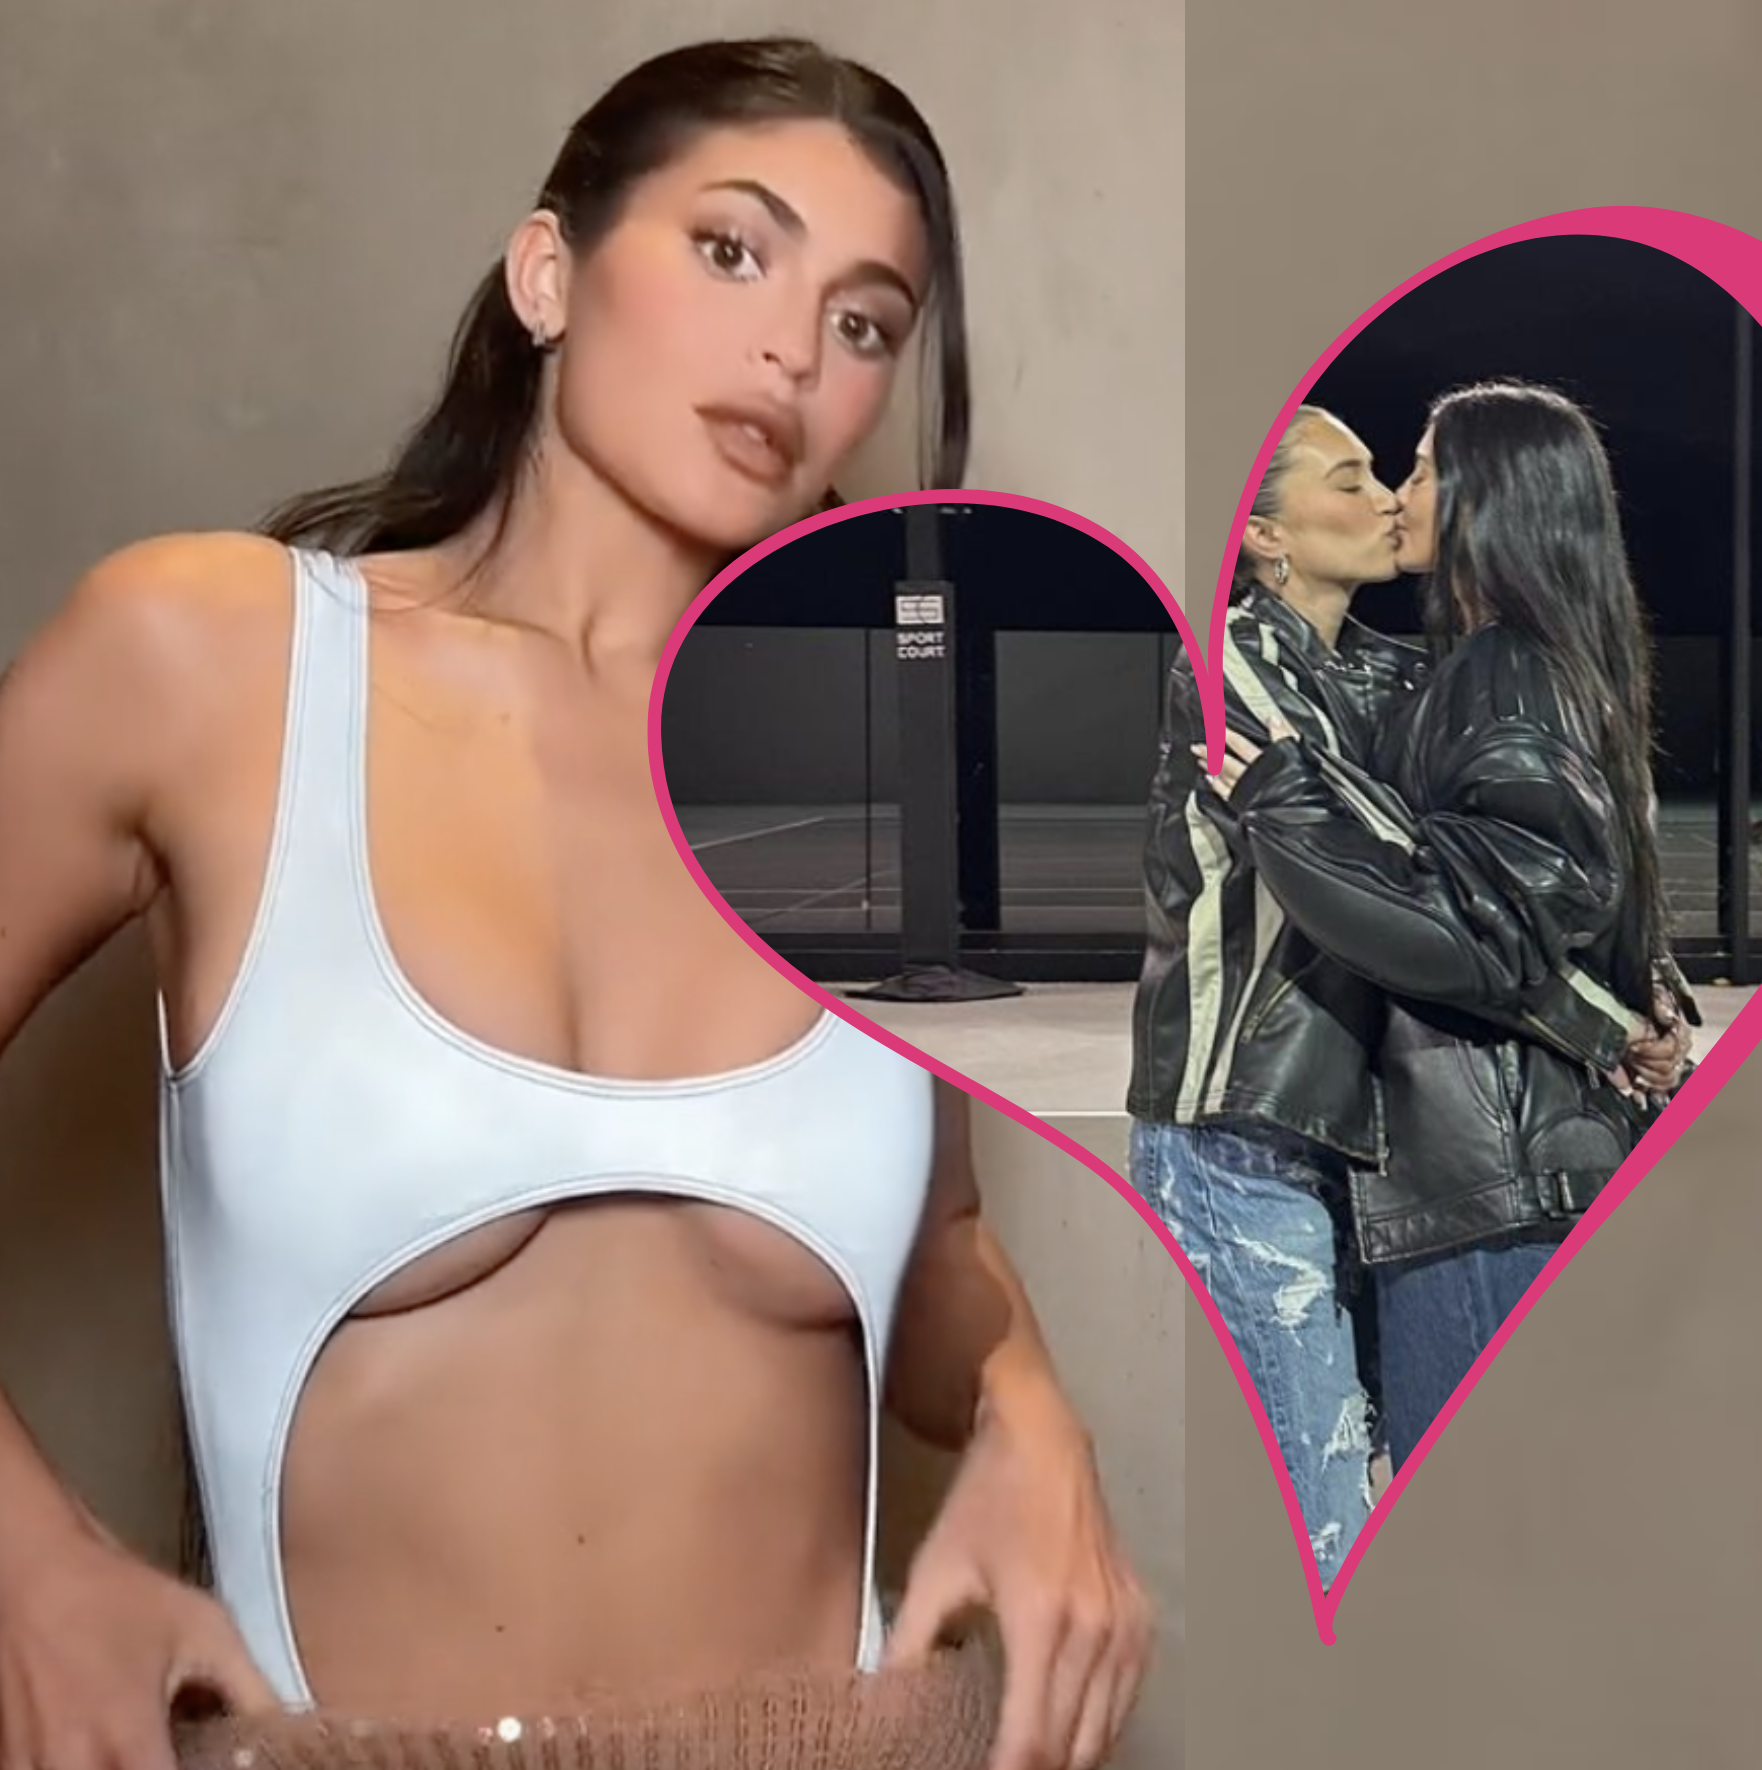 Photos n°19 : After Years of Lying, Kylie Jenner Admits That Her Boobs are Fake!